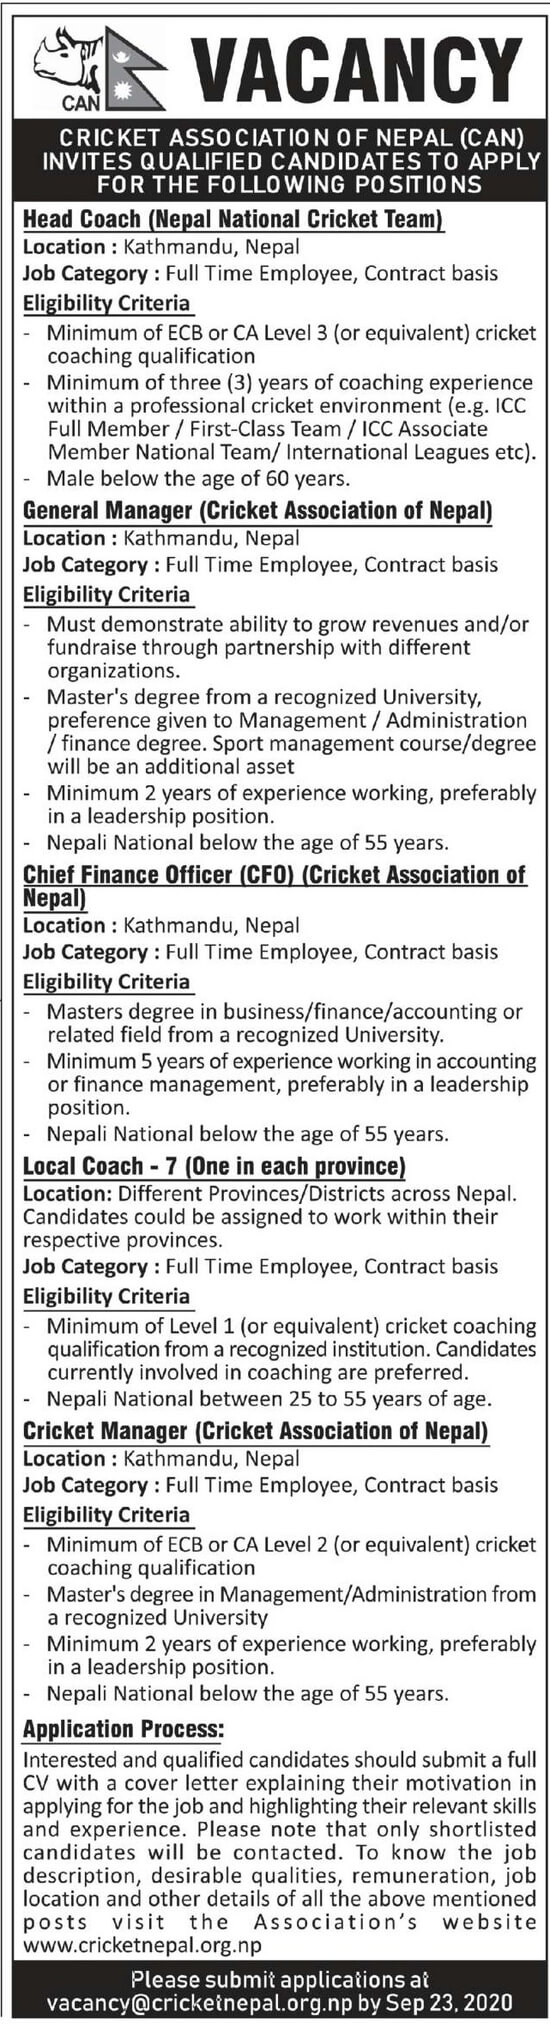 General Manager (Cricket Association of Nepal)